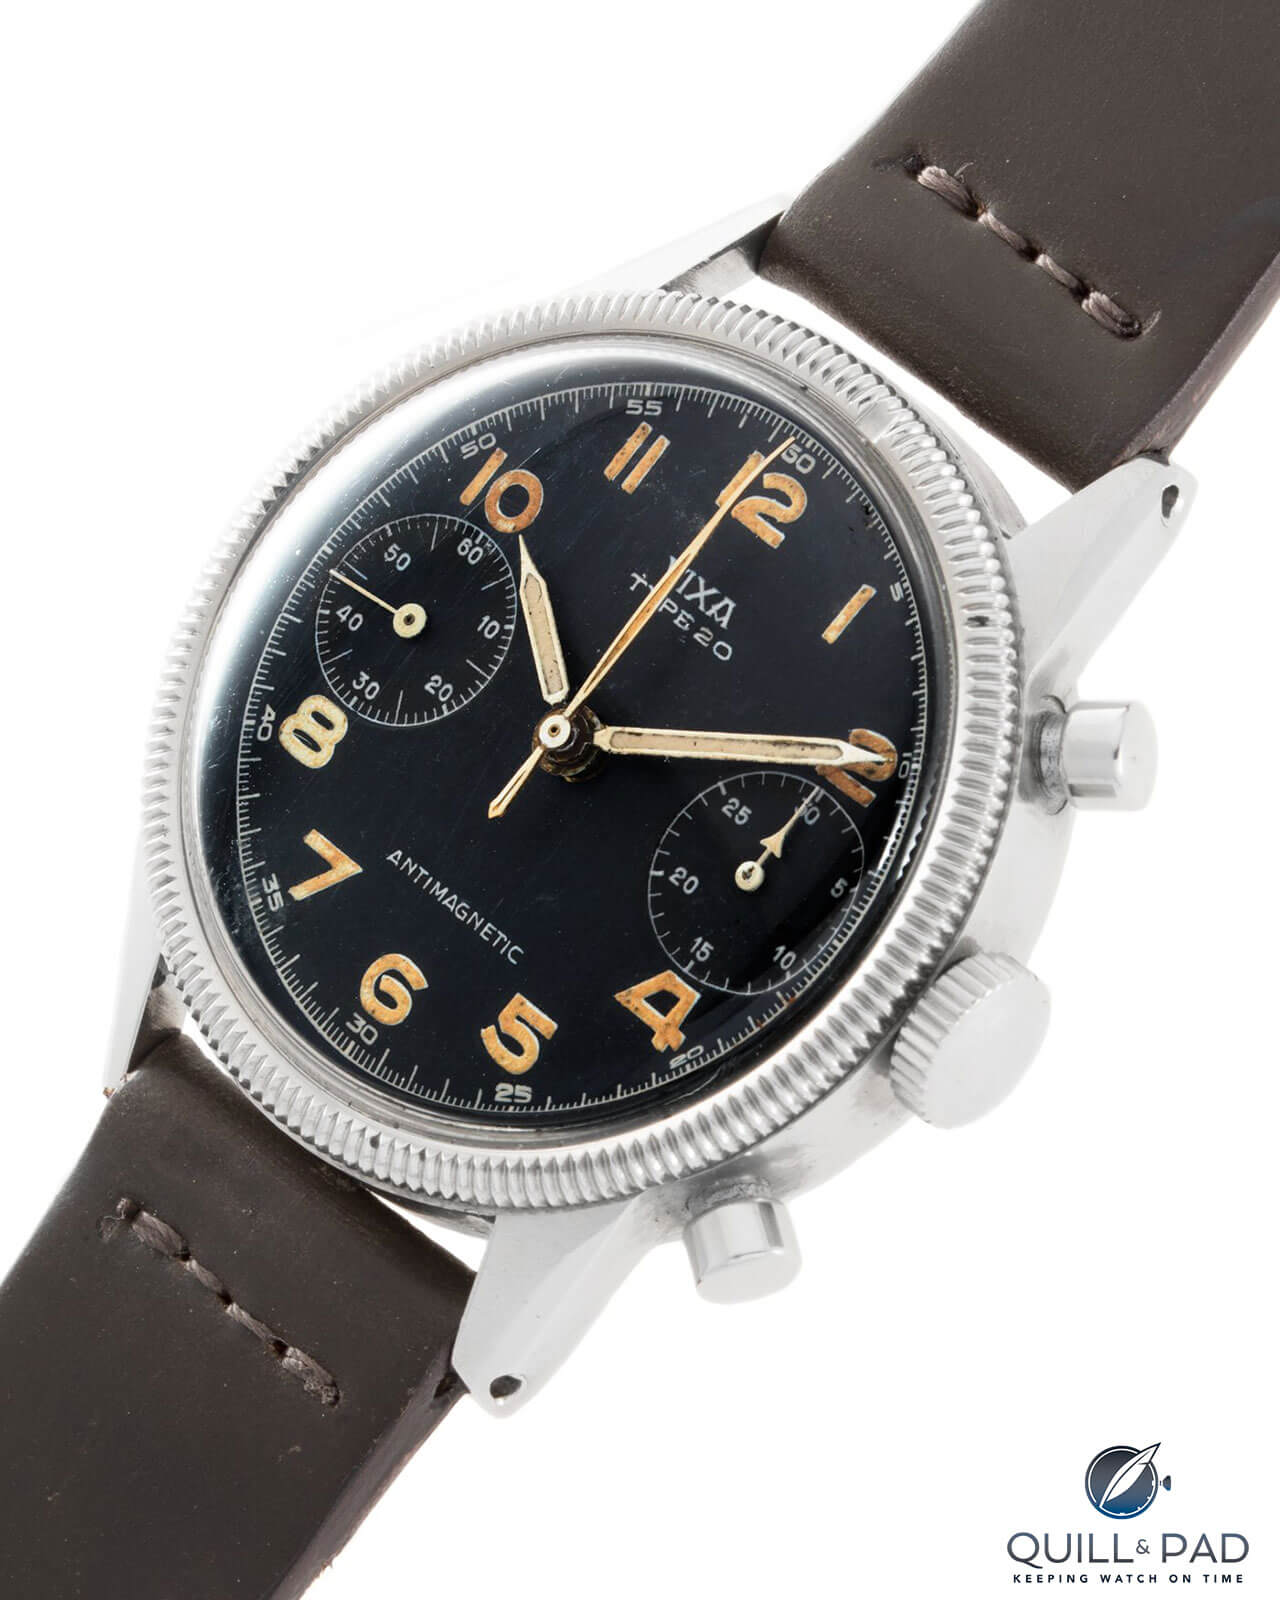 Complete Guide To Type 20 Pilot's Watch Chronographs - Reprise - Quill & Pad